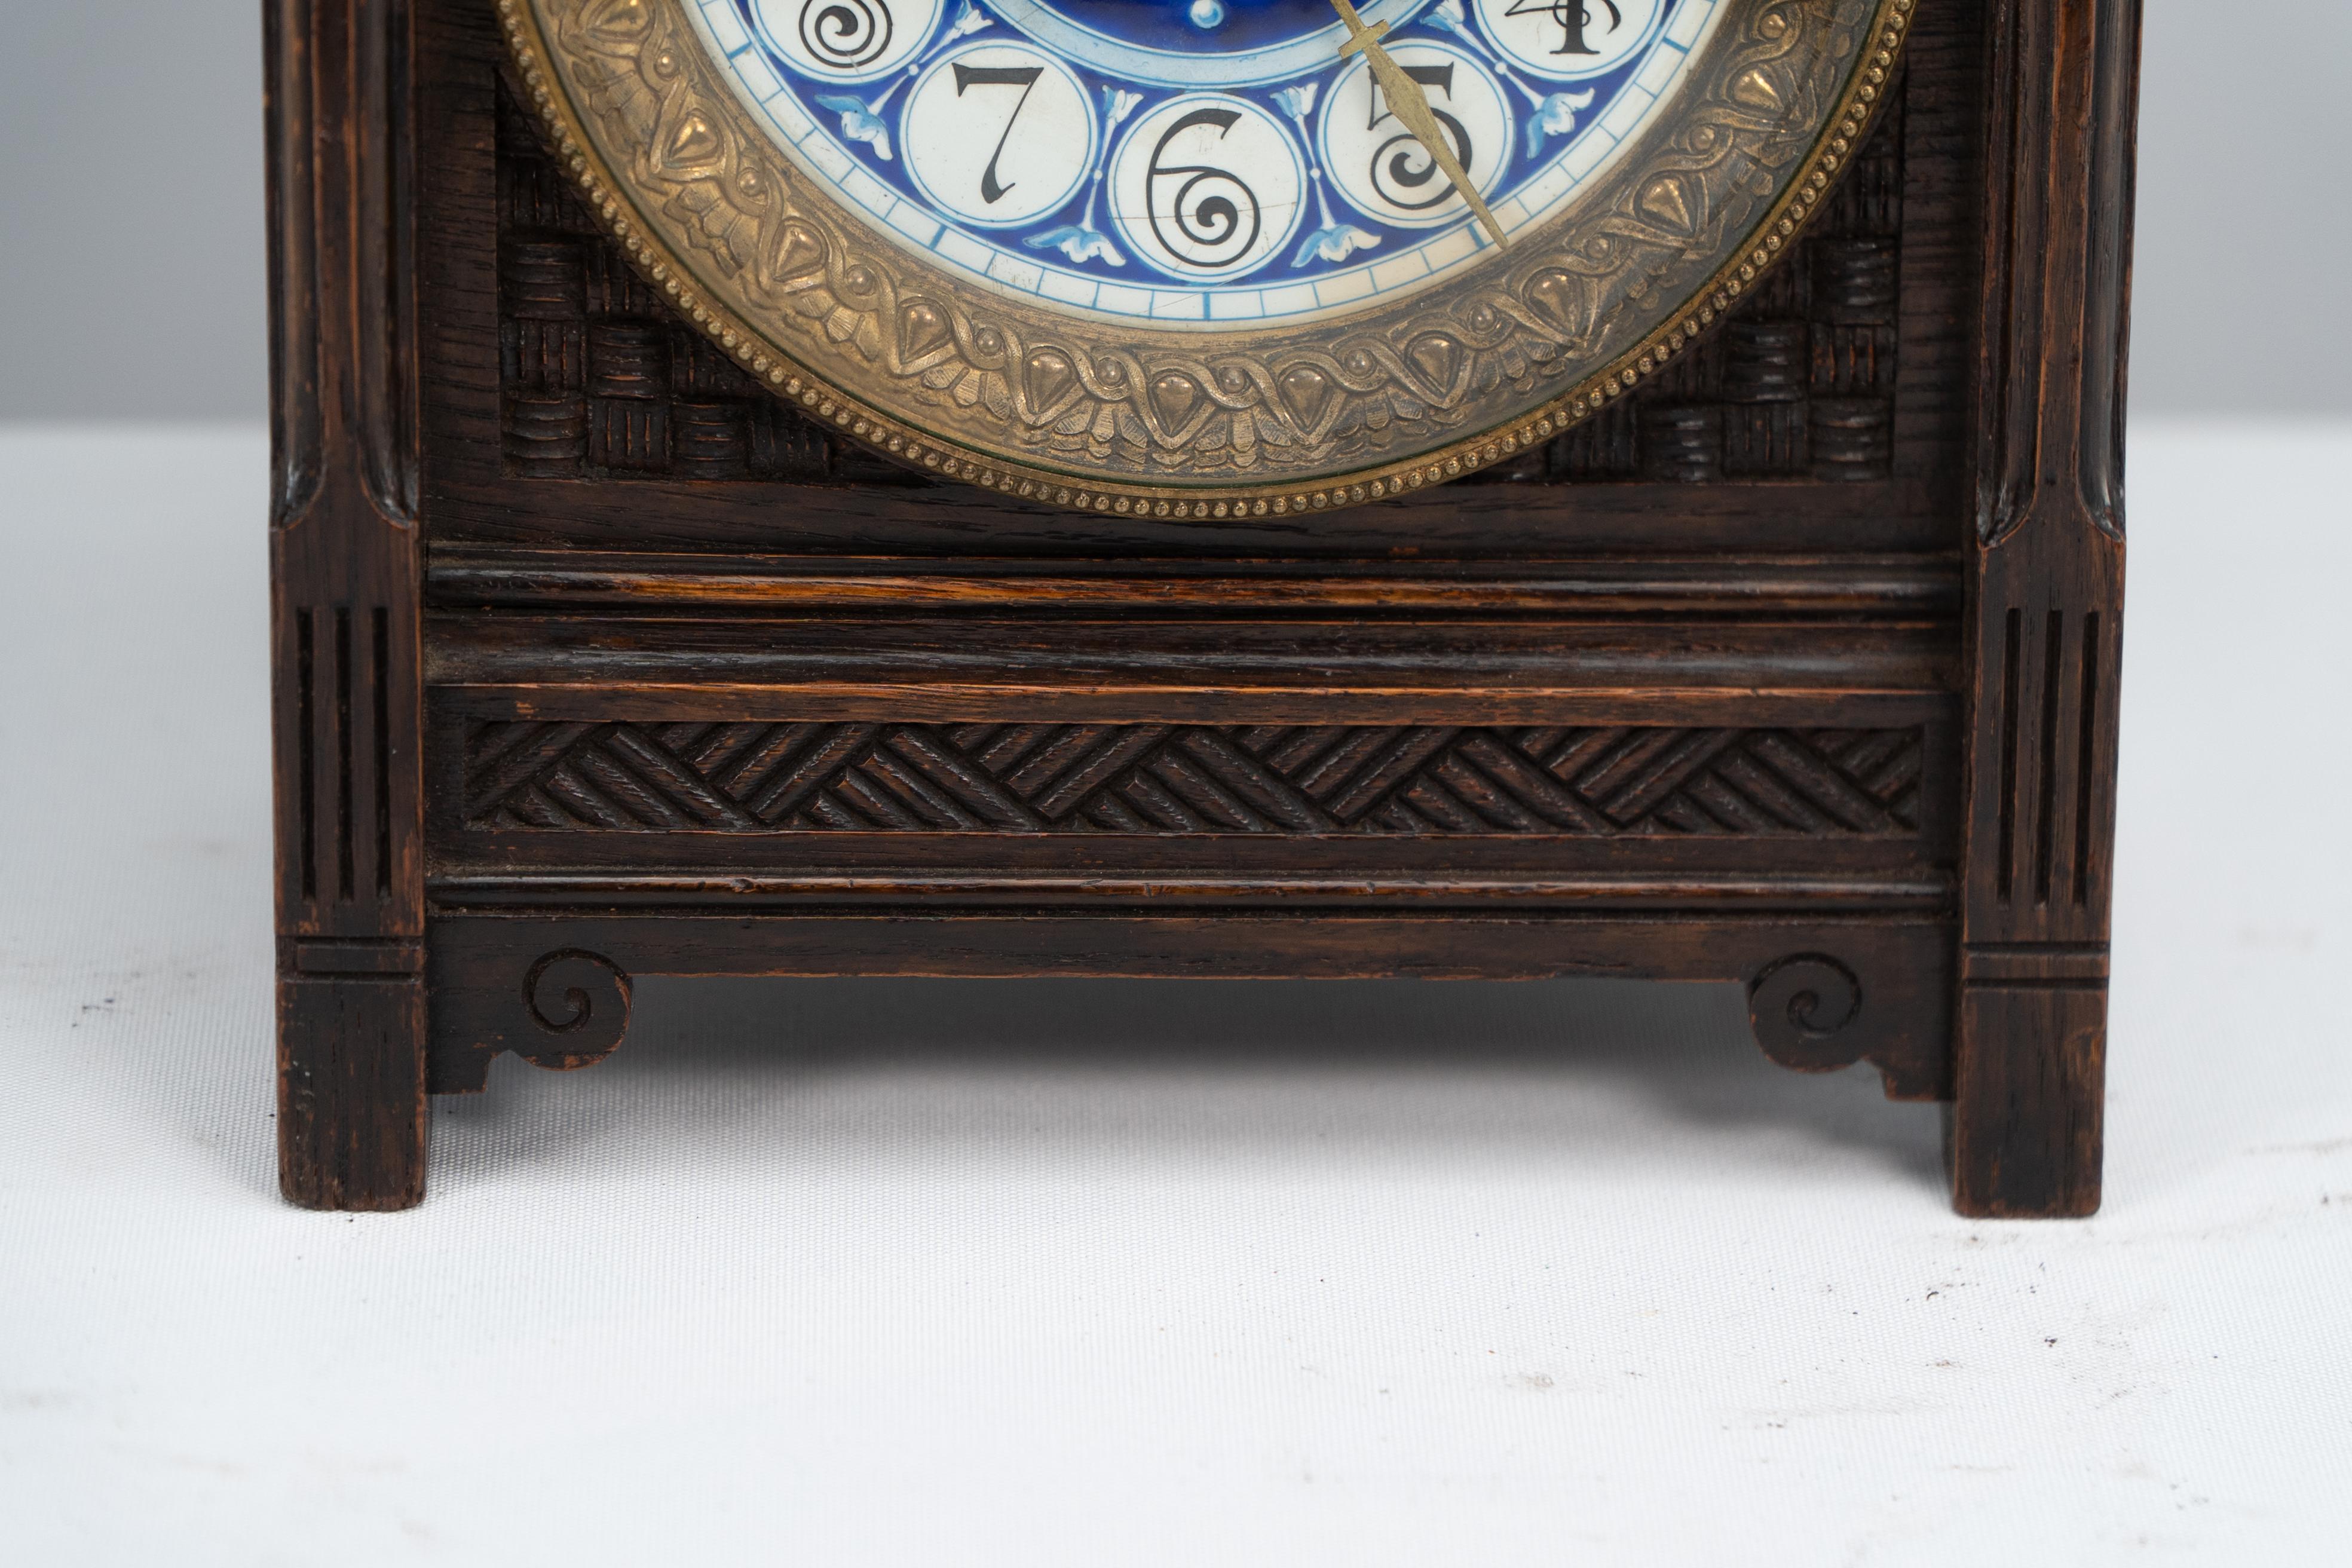 Late 19th Century An Anglo-Japanese carved oak mantel clock with hand painted blue floral dial. For Sale